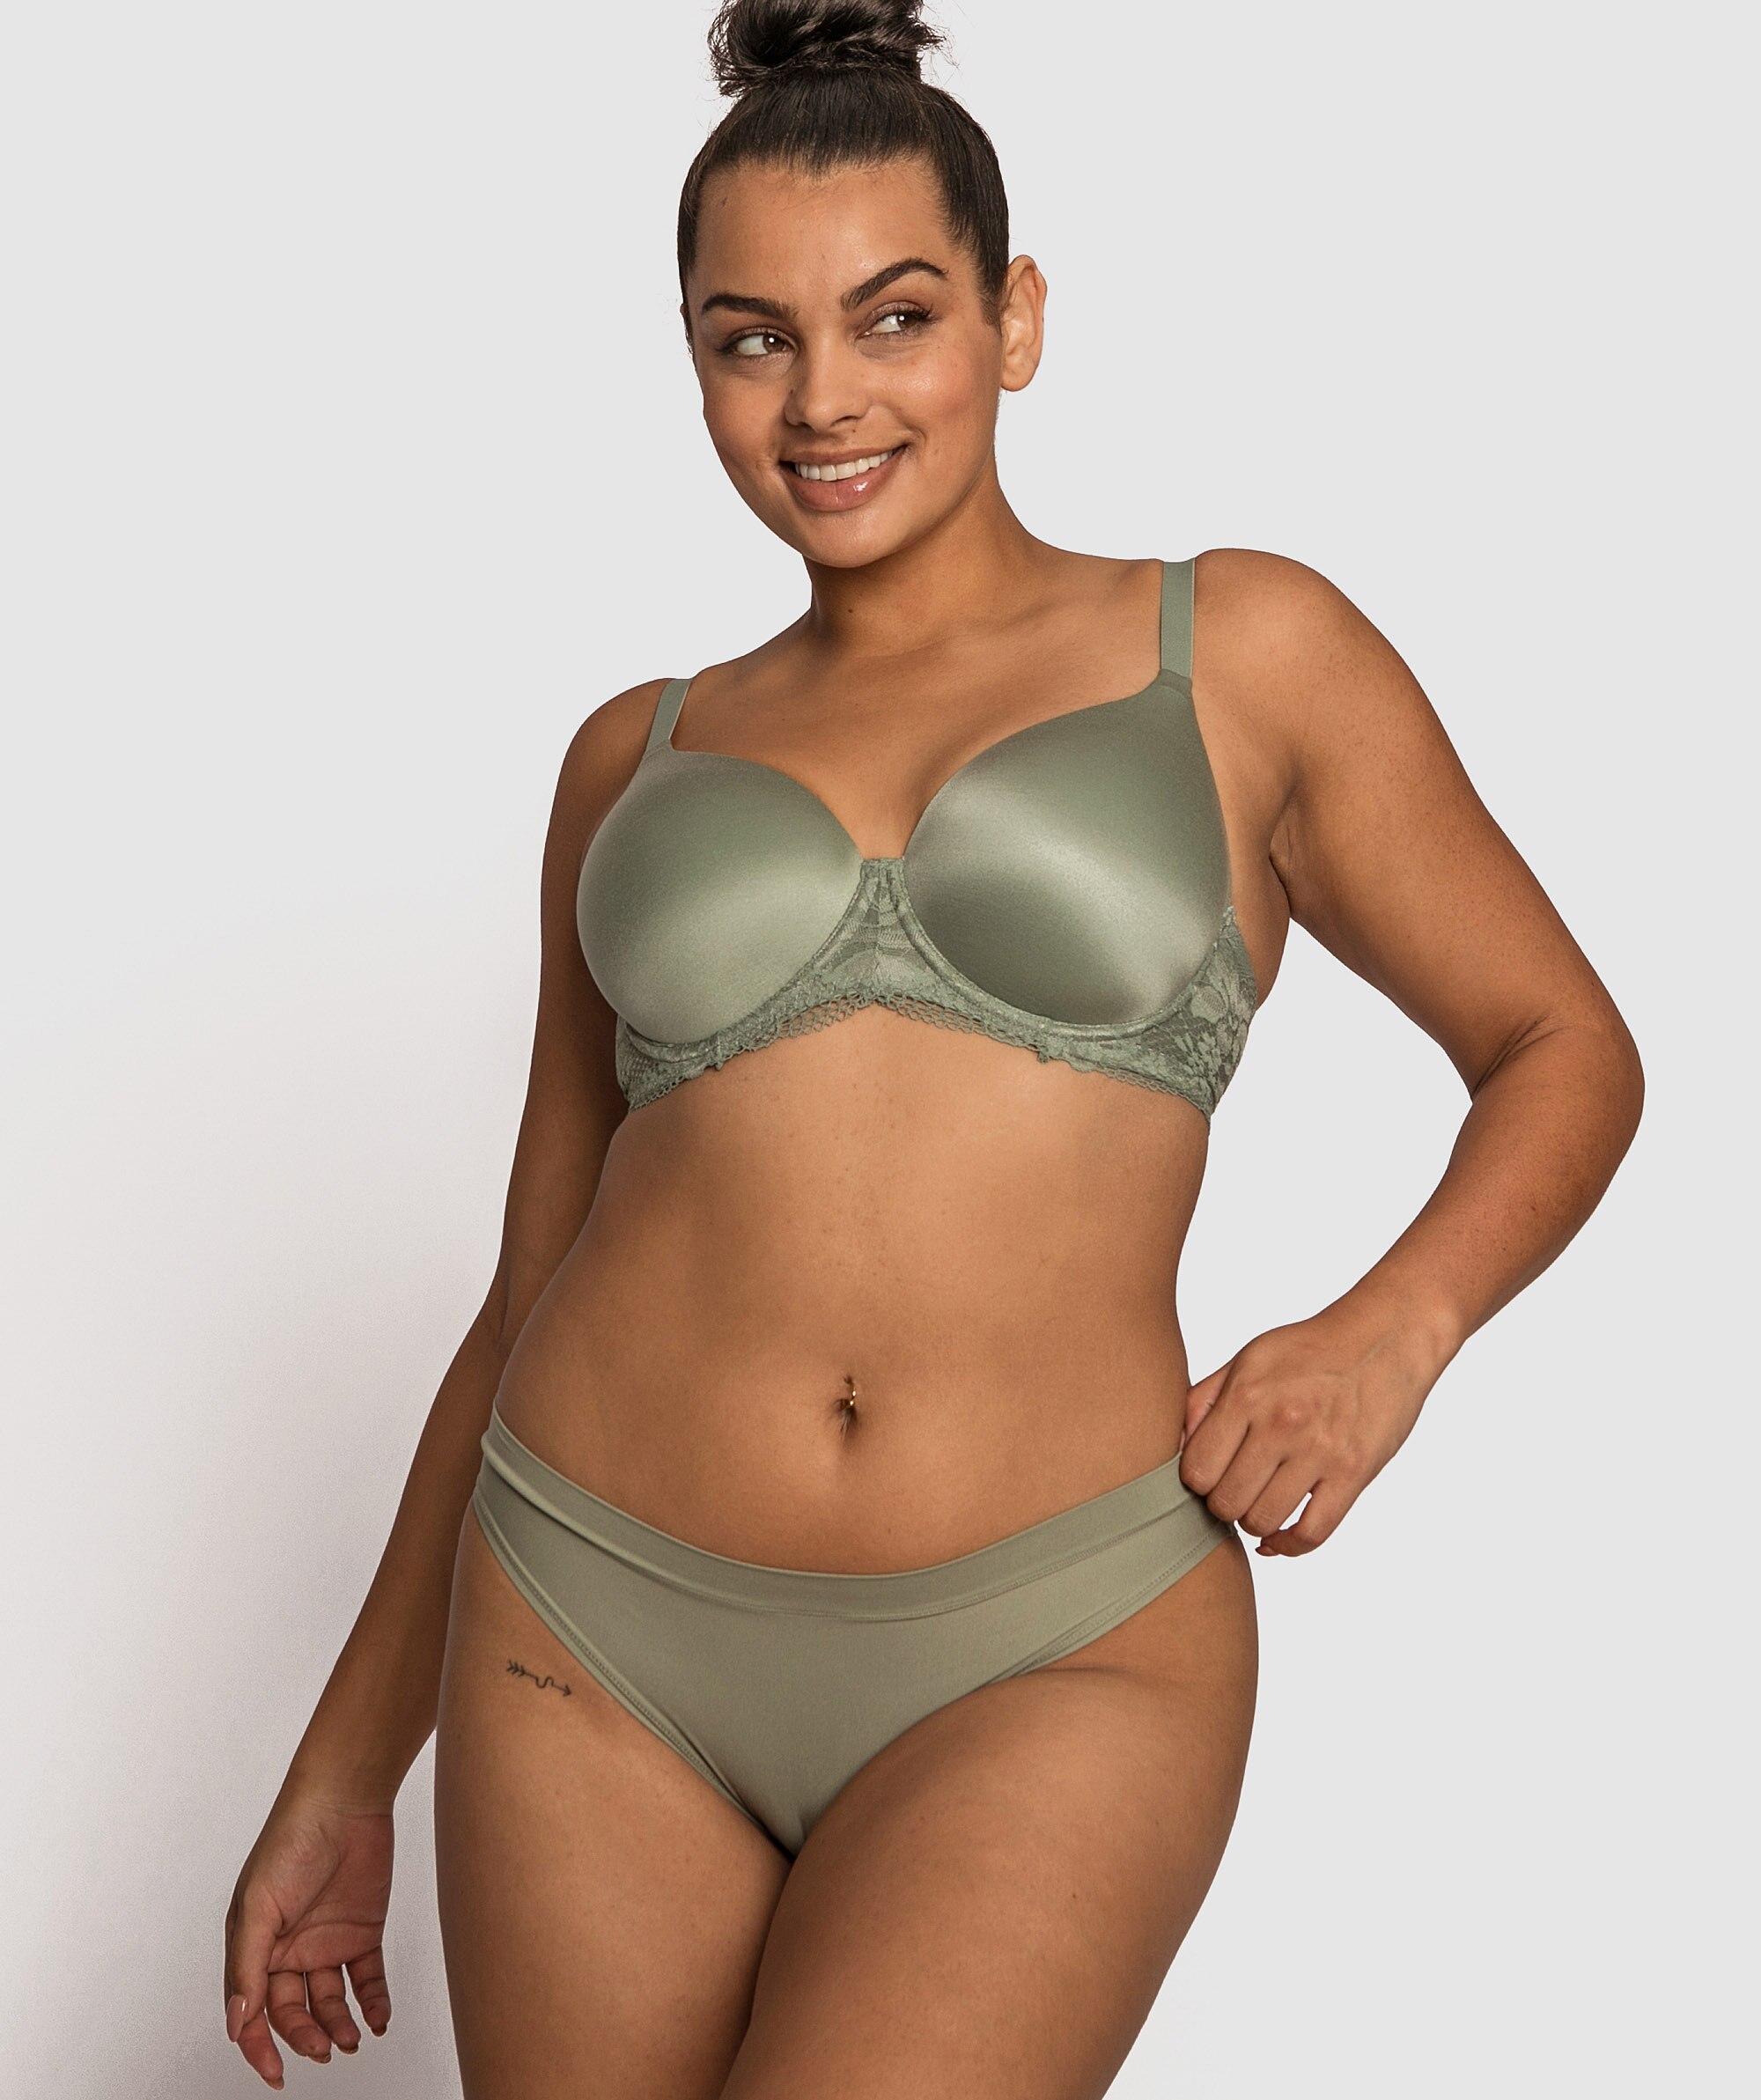 Body Bliss Lace Full Cup Bra - Green